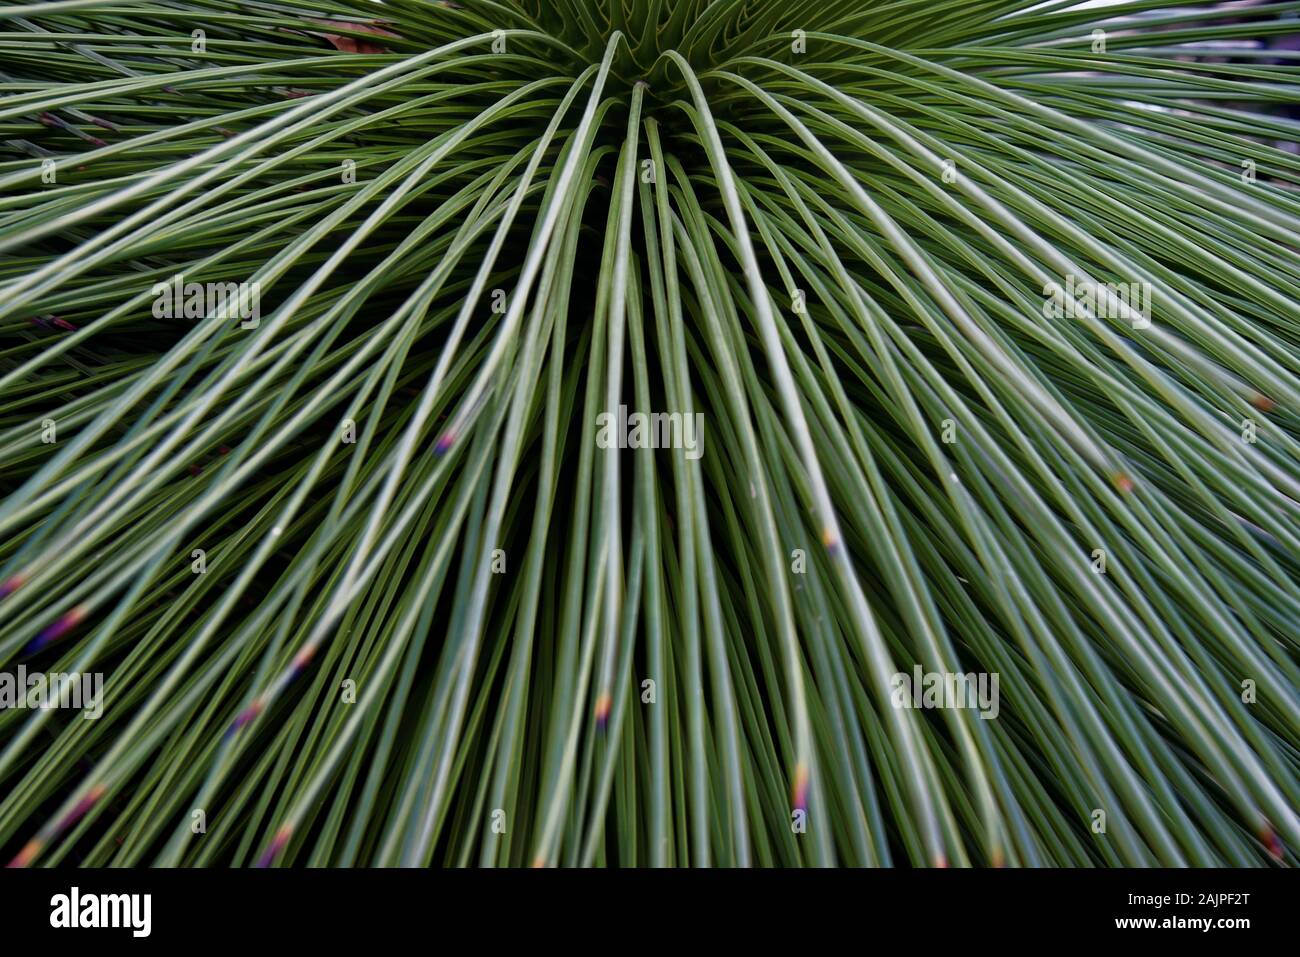 Yucca queretaroensis is a plant species in the genus Yucca, family Asparagaceae, native to the Sierra Madre Occidental of Mexico. Stock Photo